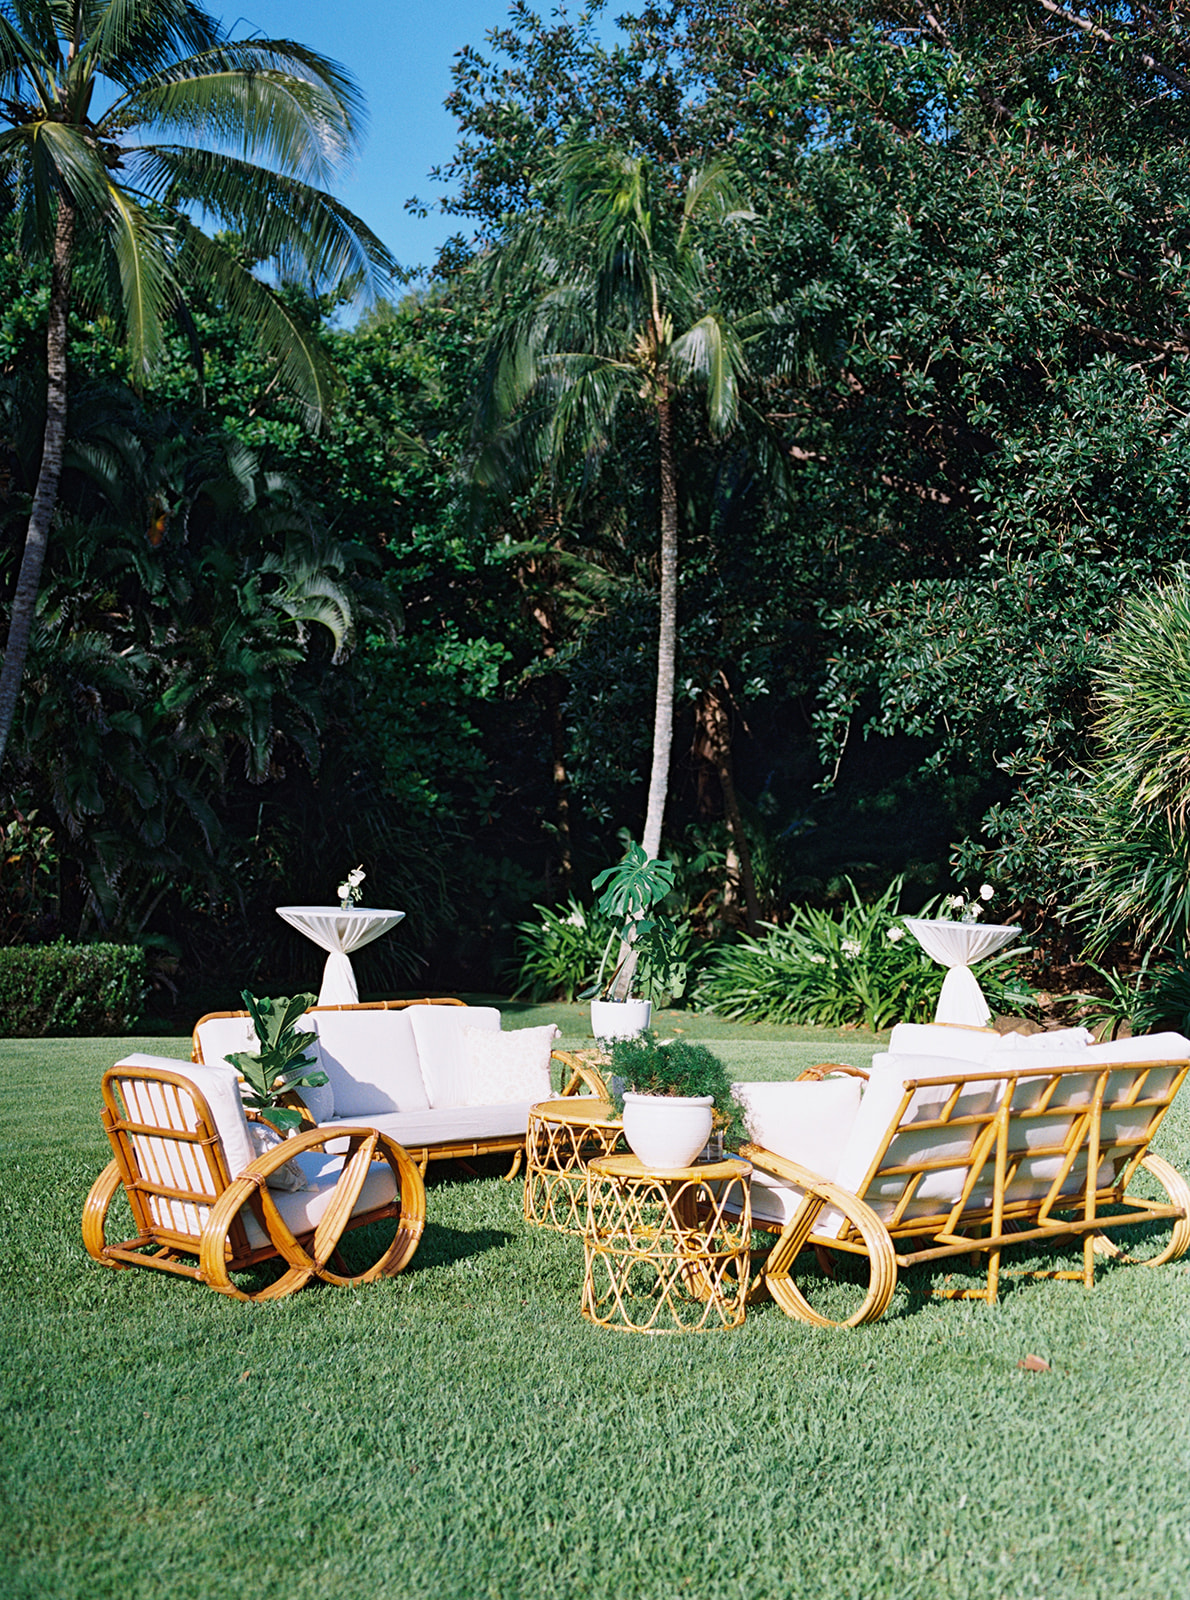 Chic outdoor seating area with rattan furniture on a well-manicured lawn Destination Wedding in Kauai
